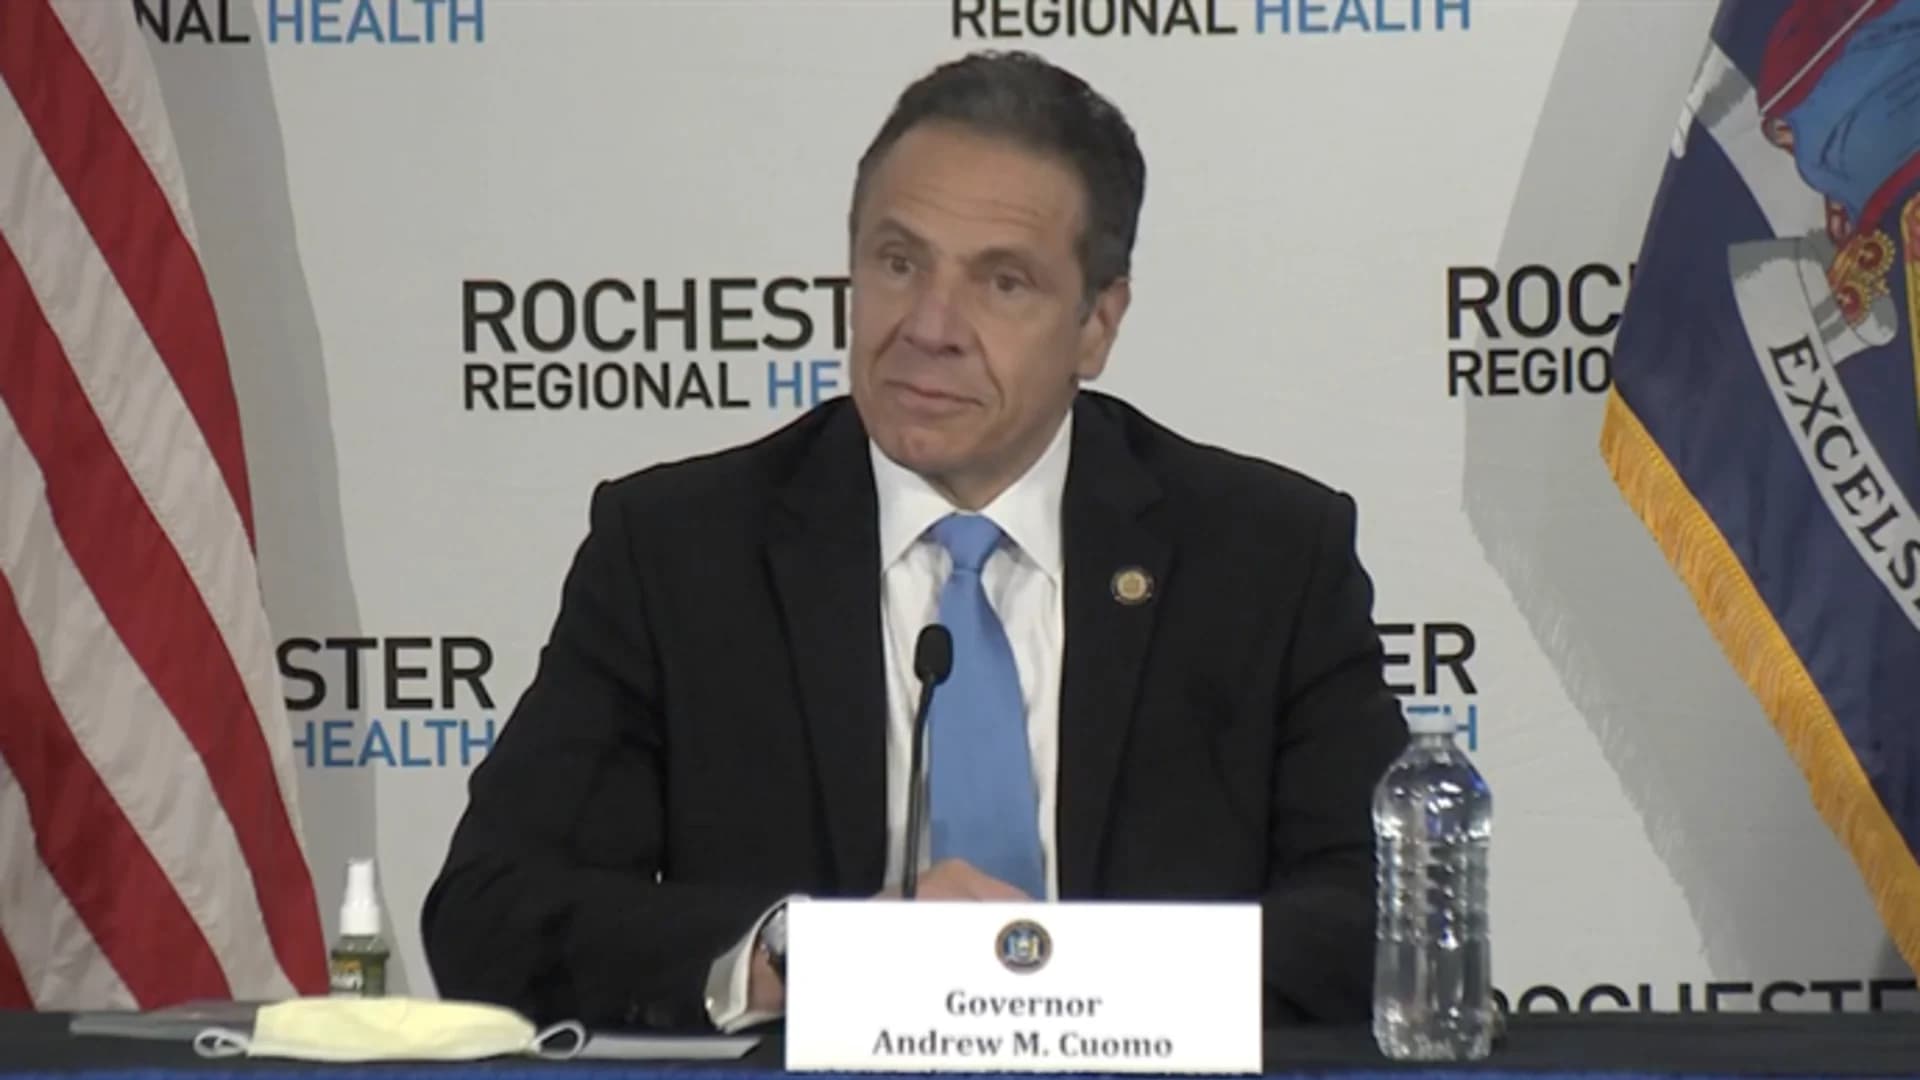 Gov. Cuomo says NY regions preparing to 'intelligently' reopen when PAUSE expires, announces 'control rooms' to monitor progress